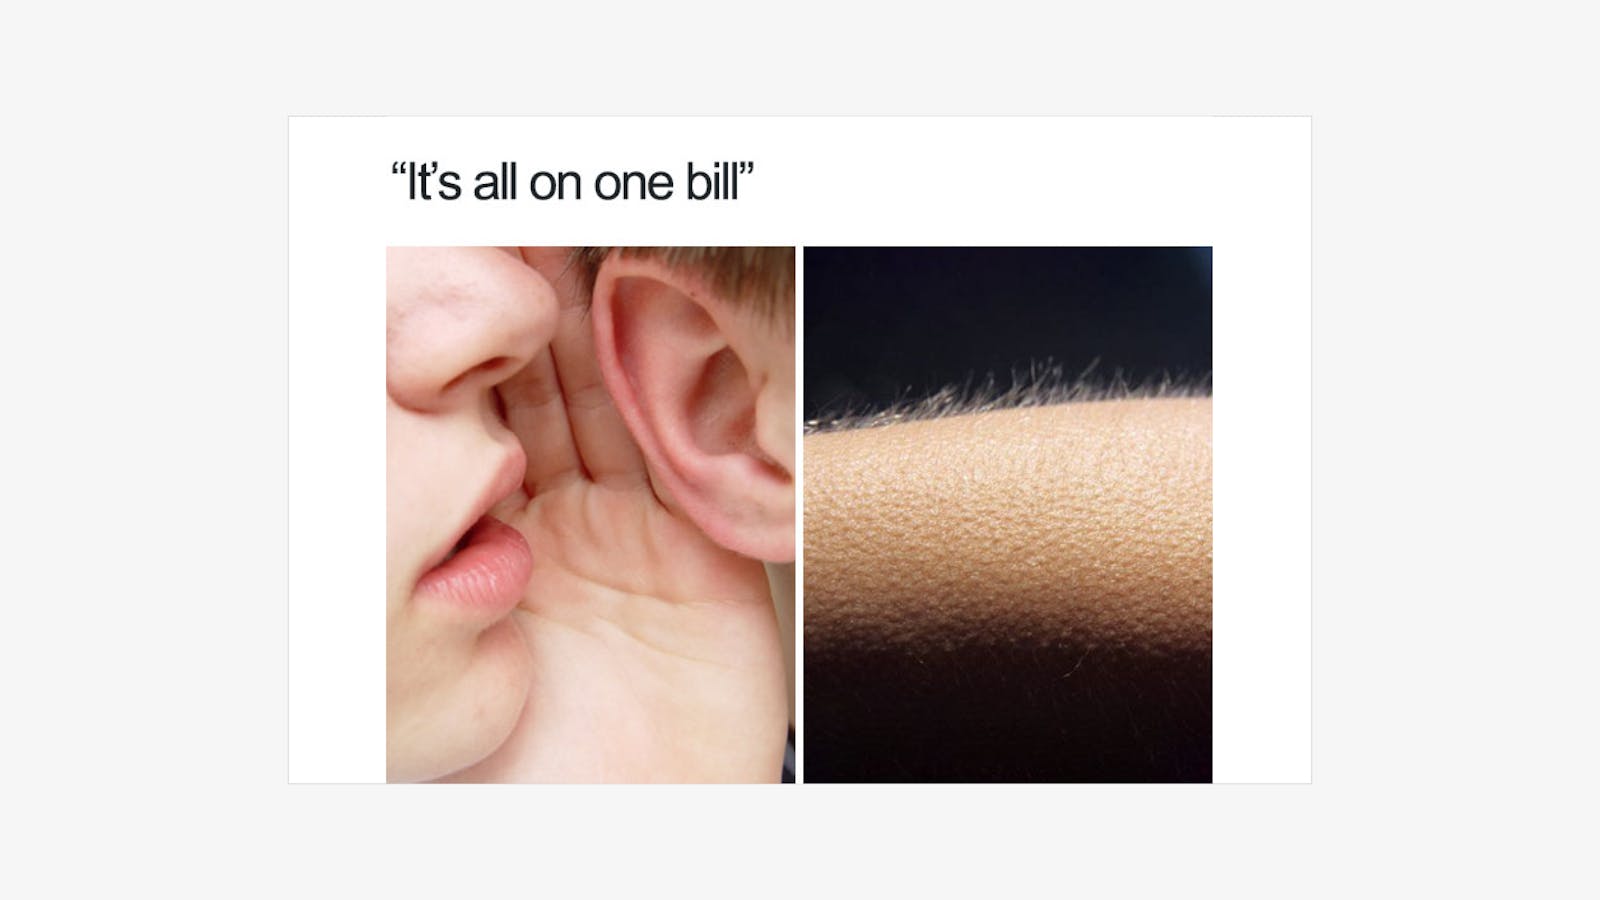 Relatable restaurant whispering in ear meme and goosebumps from "it's all on one bill." 